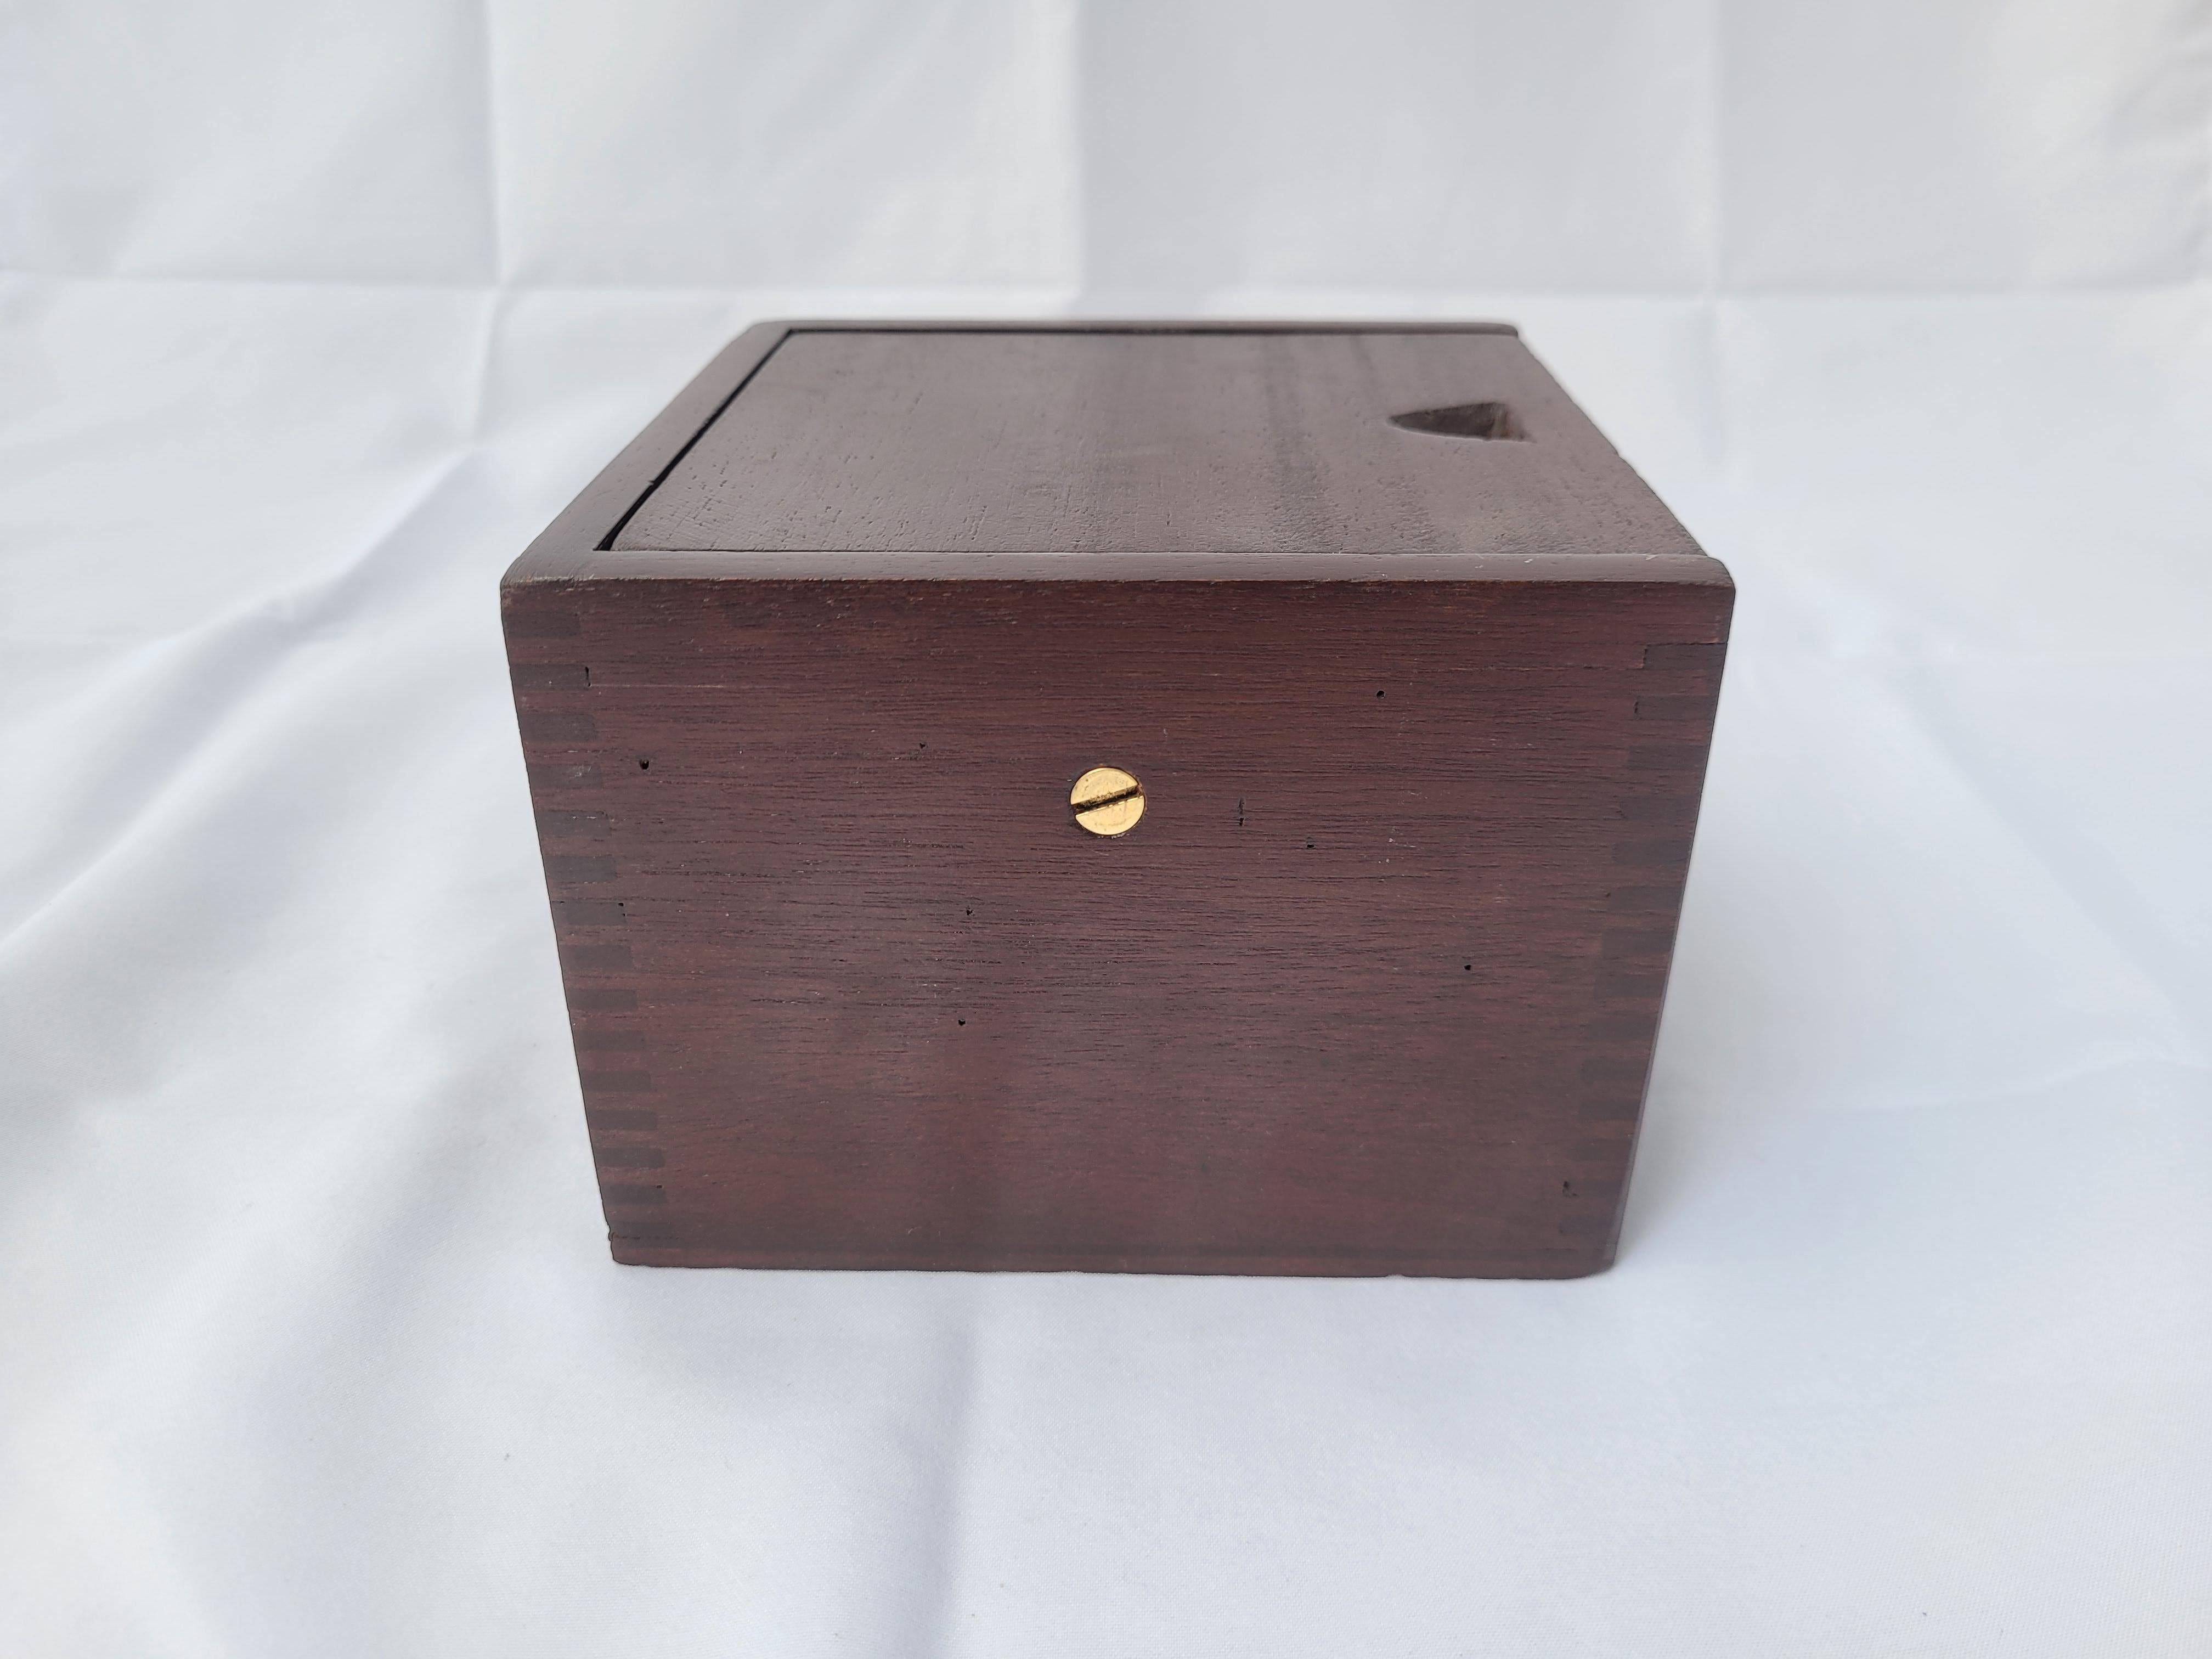 Solid brass boat compass fitted to a dovetailed wood box with rich varnished finish. Compass card is marked Star Pathfinder, Milton Mass. The entire compass has been polished and lacquered to perfection. Awesome nautical accent.

Weight 4